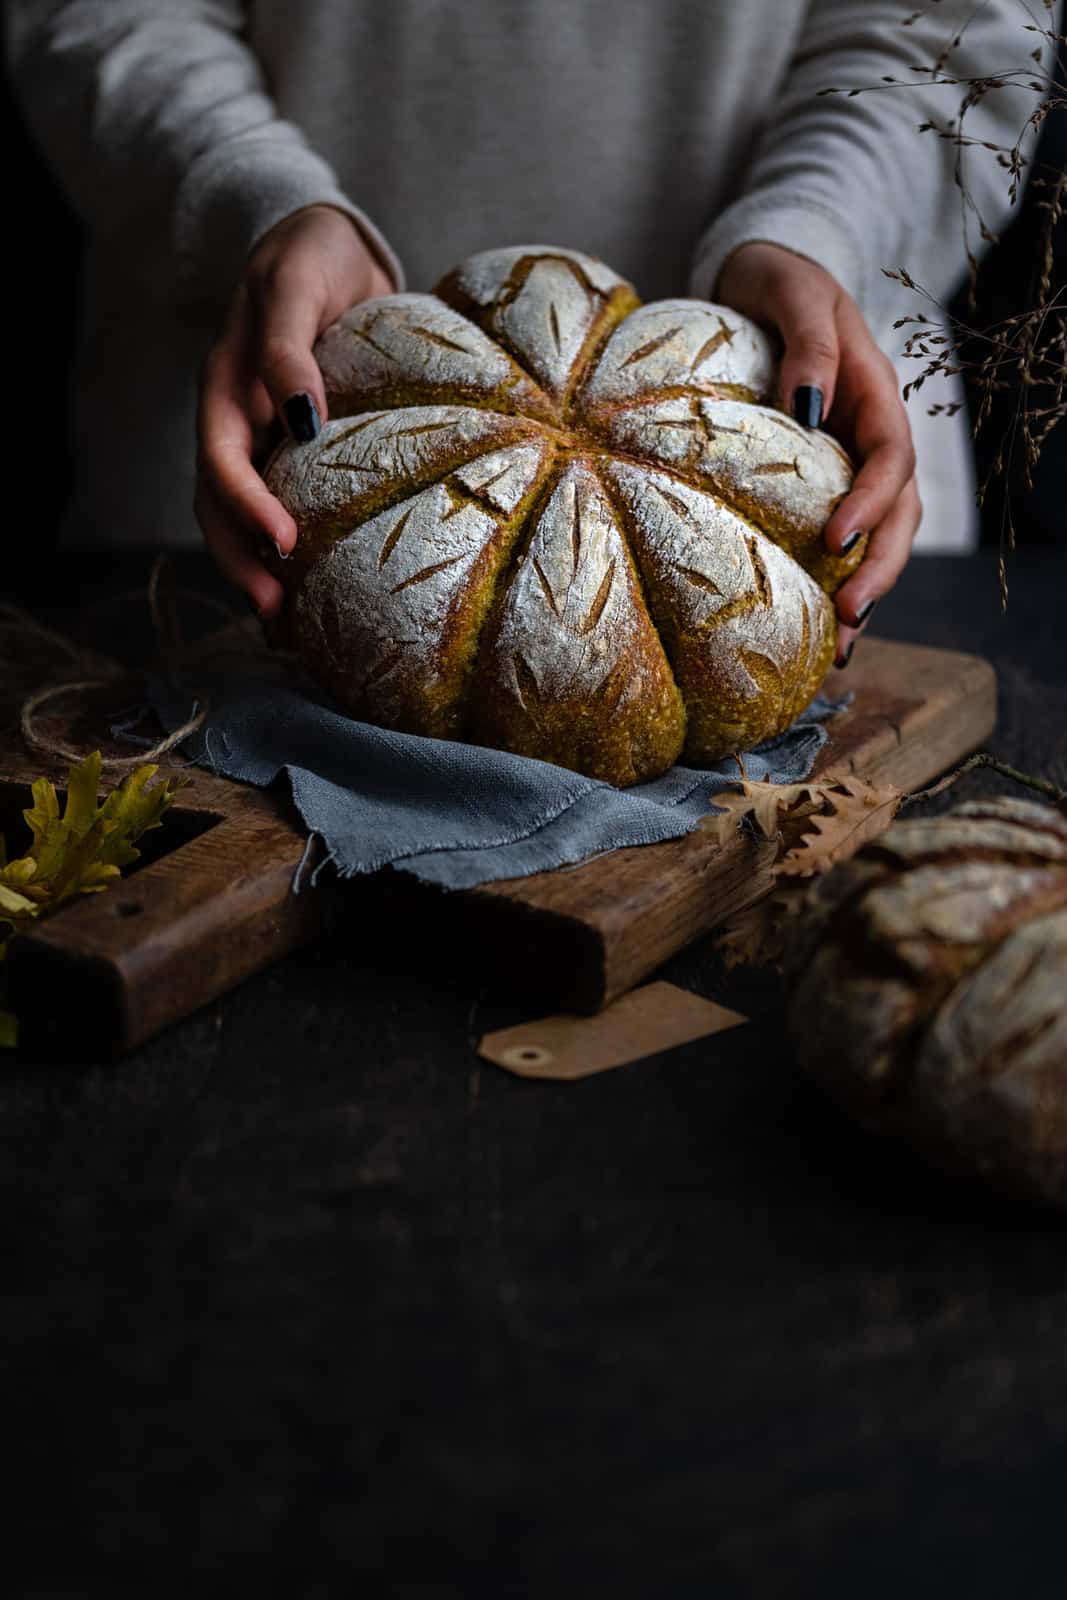 Hands holding a pumpkin shaped sourdough bread with pumpkin purée and spices